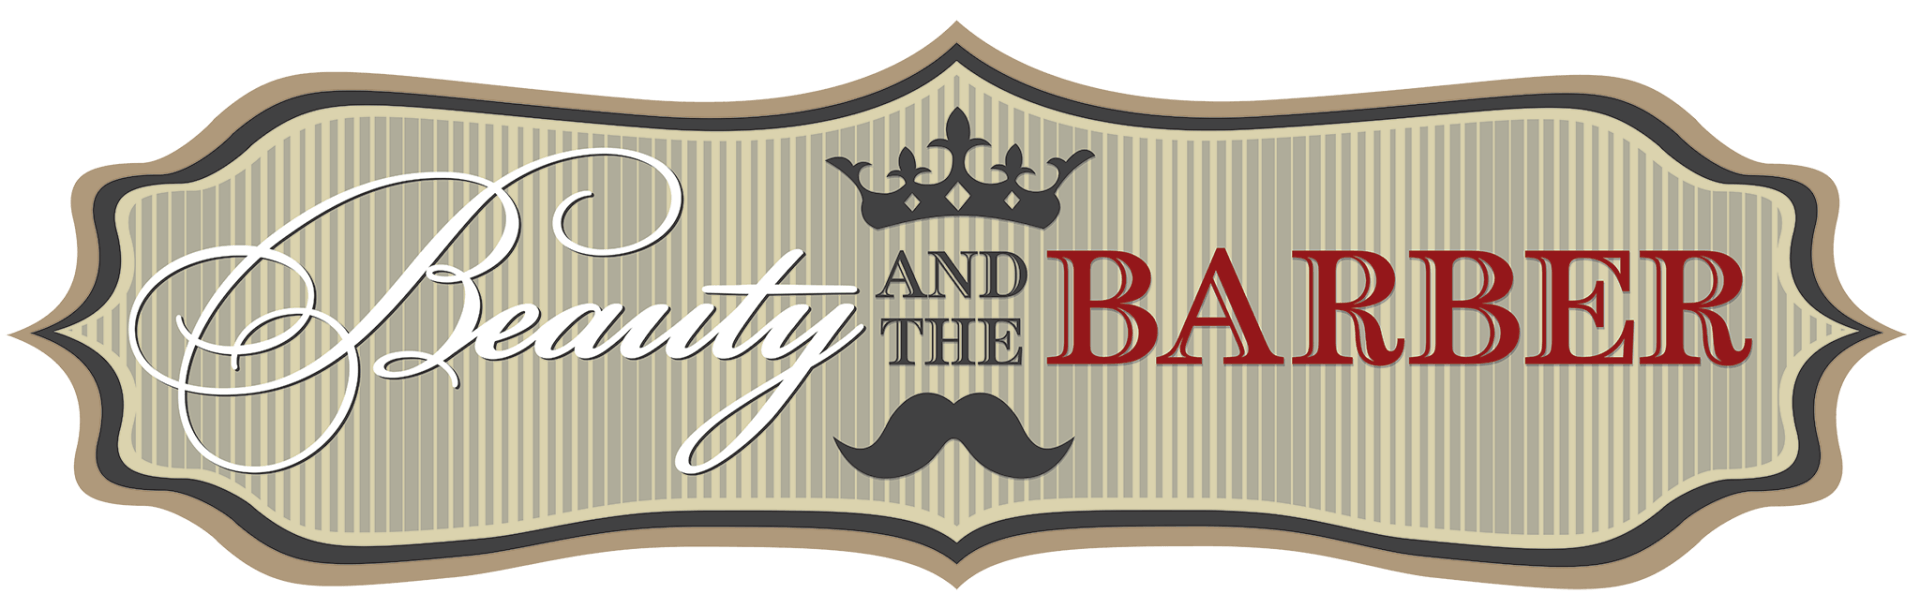 Beauty and the Barber logo